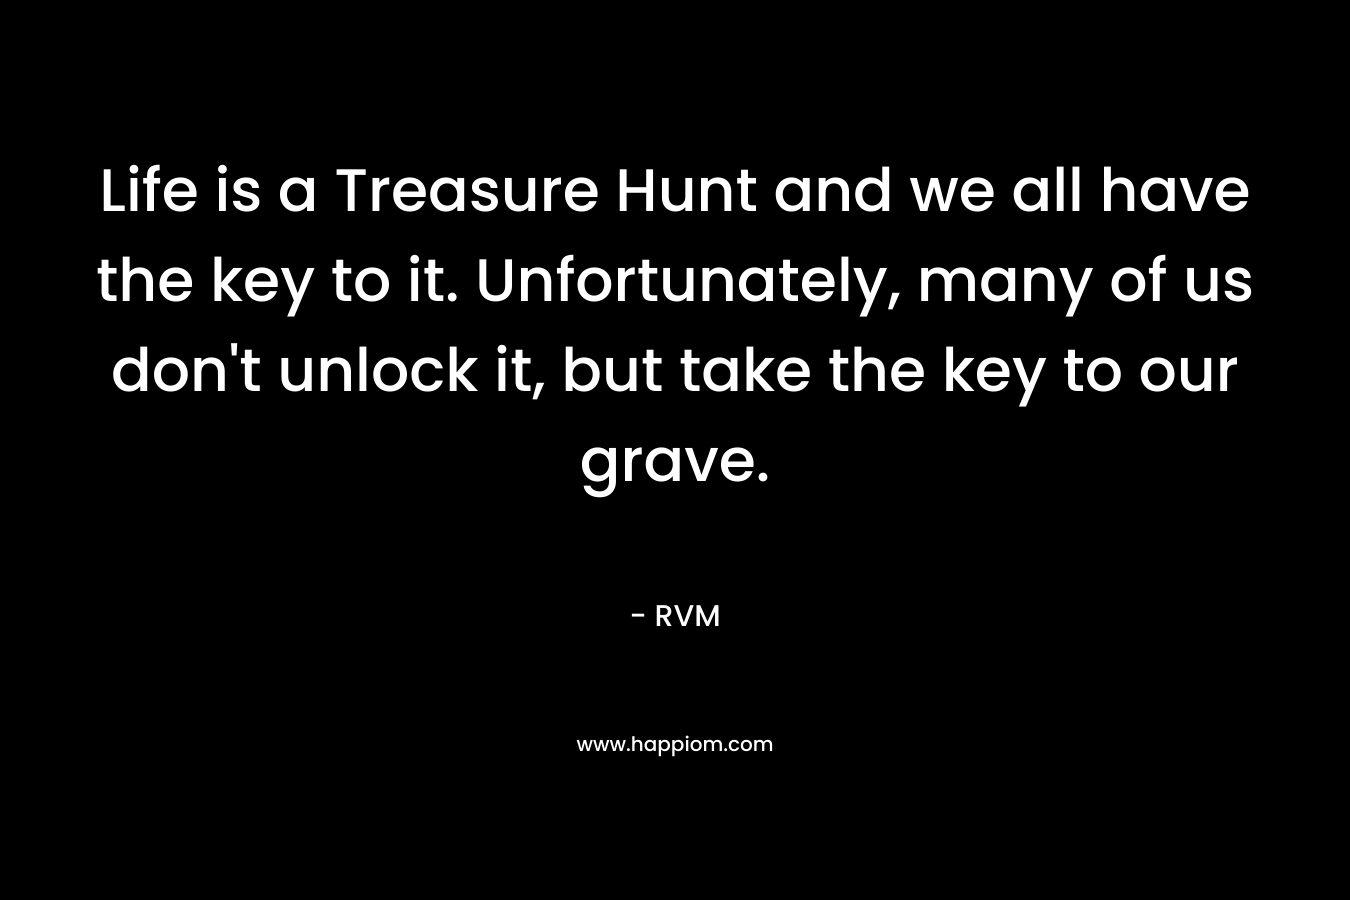 Life is a Treasure Hunt and we all have the key to it. Unfortunately, many of us don't unlock it, but take the key to our grave.